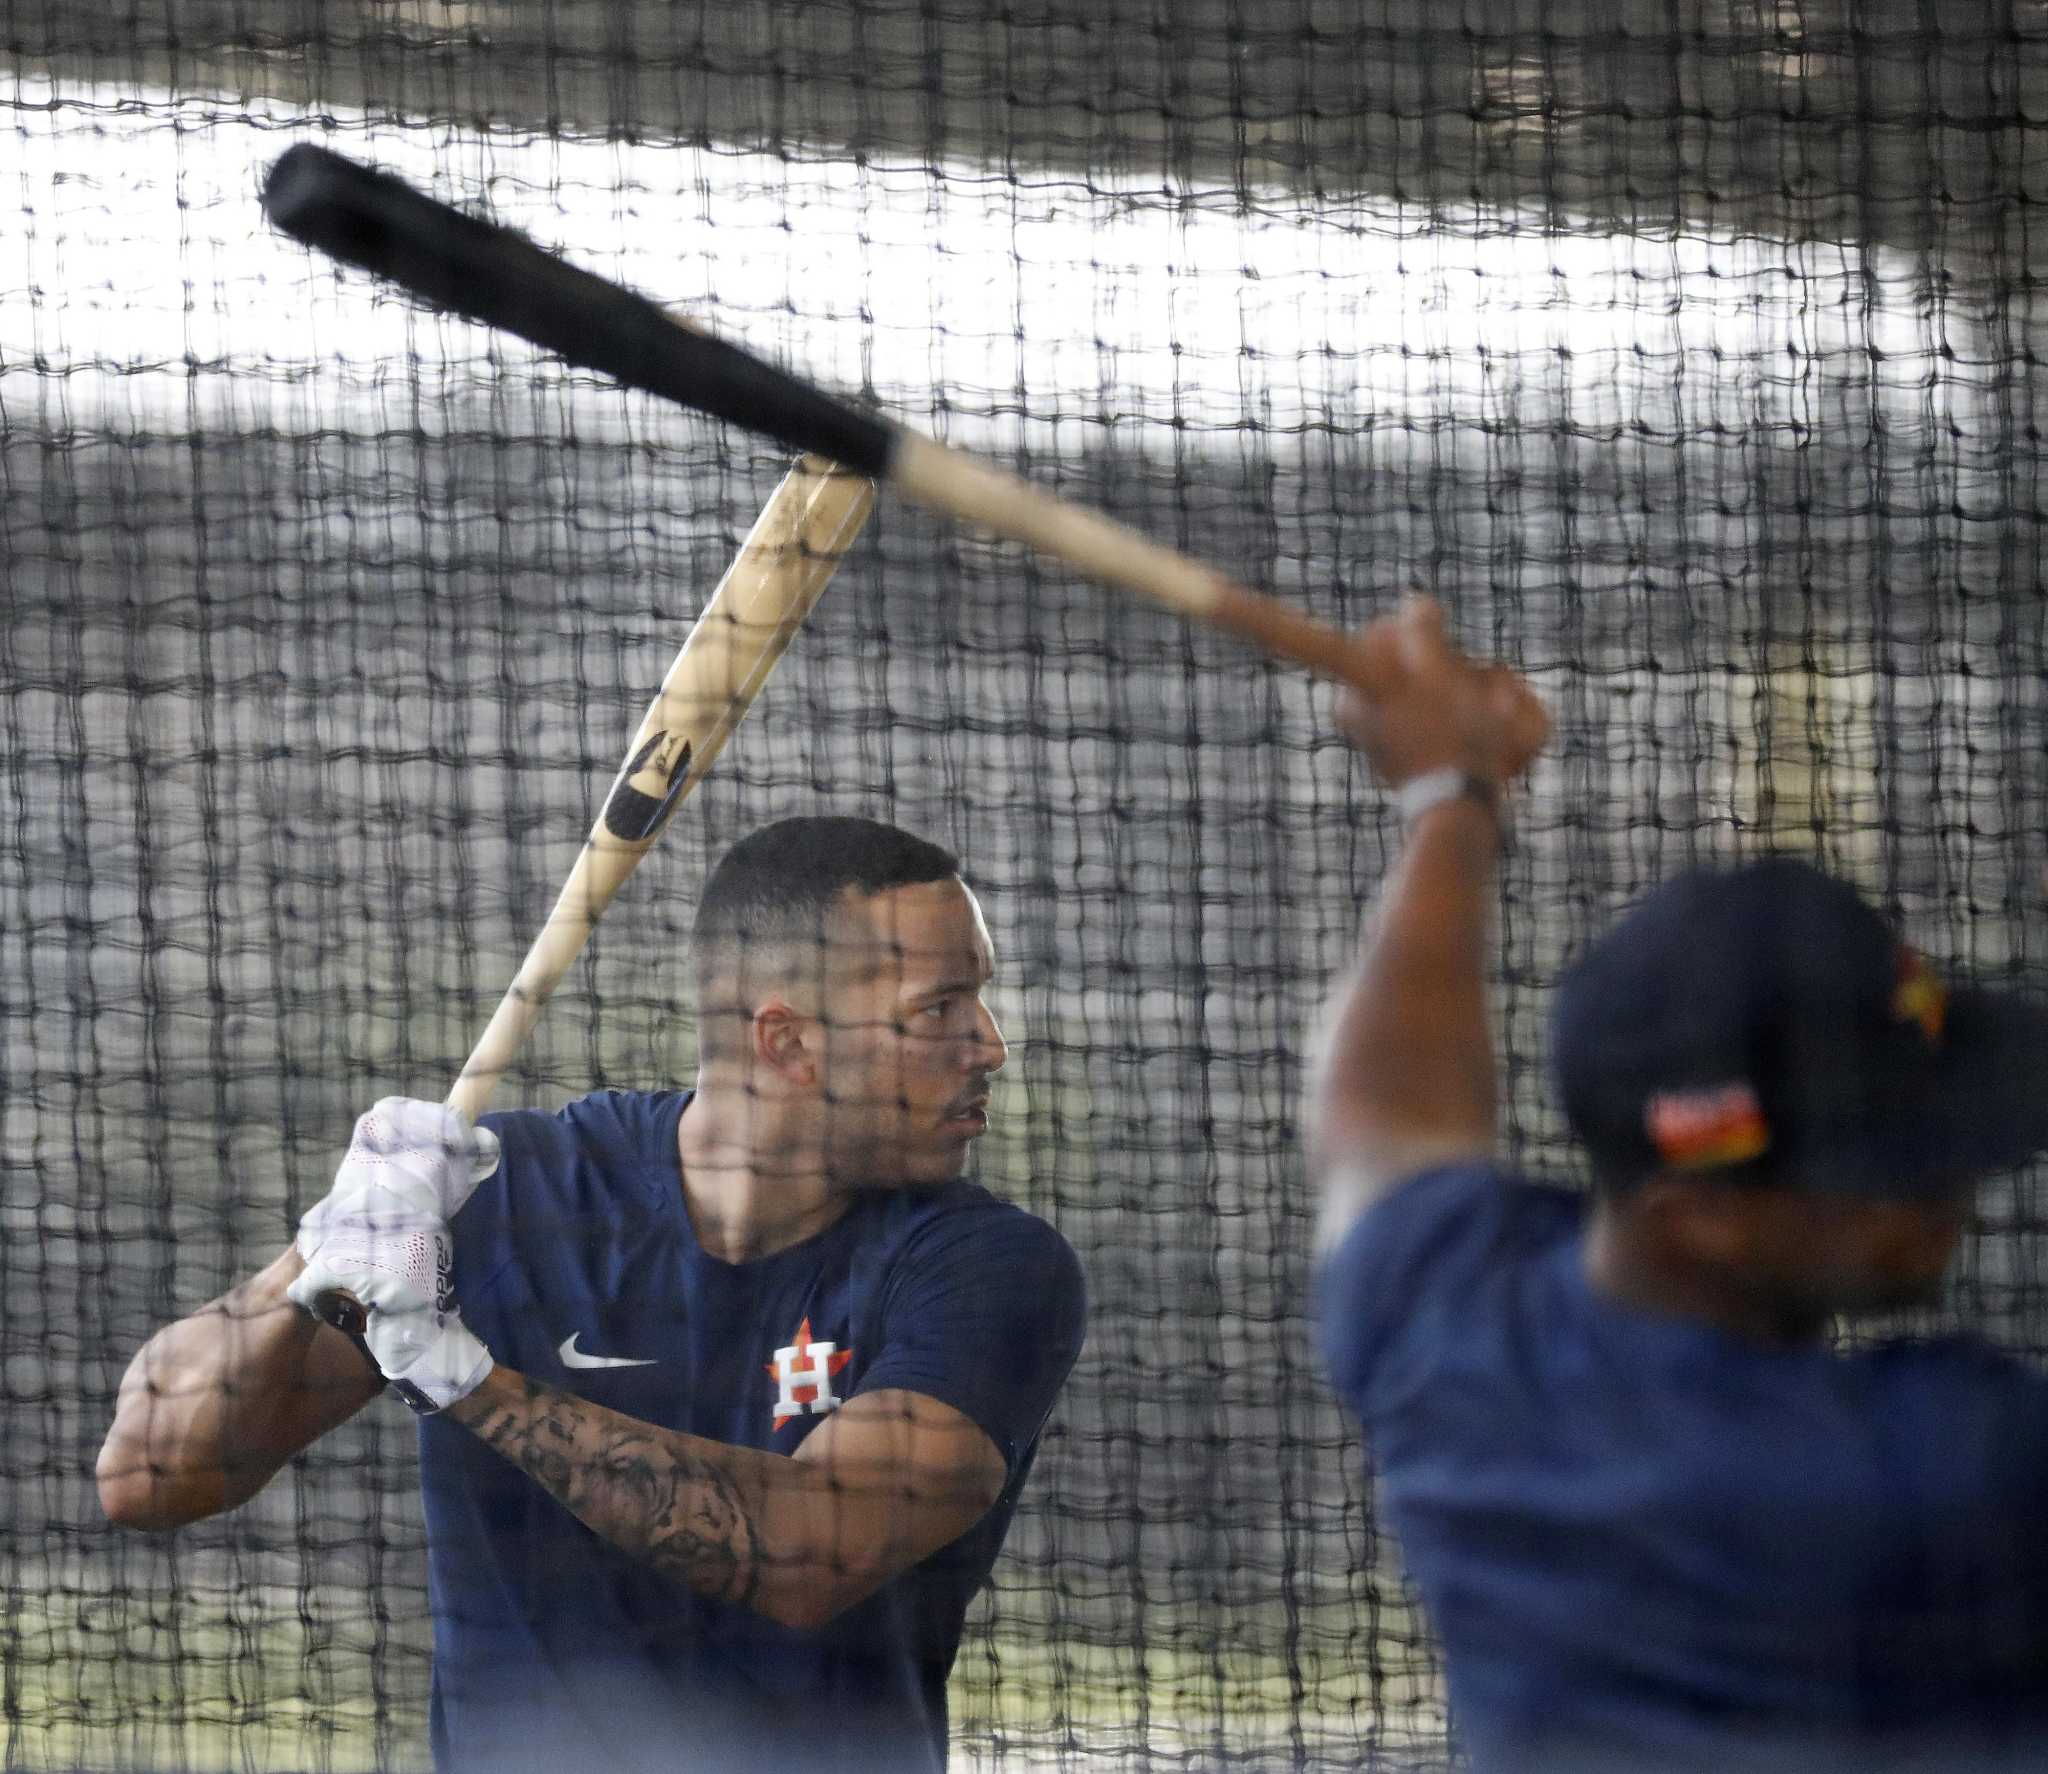 Carlos Correa comes out swinging for his teammates